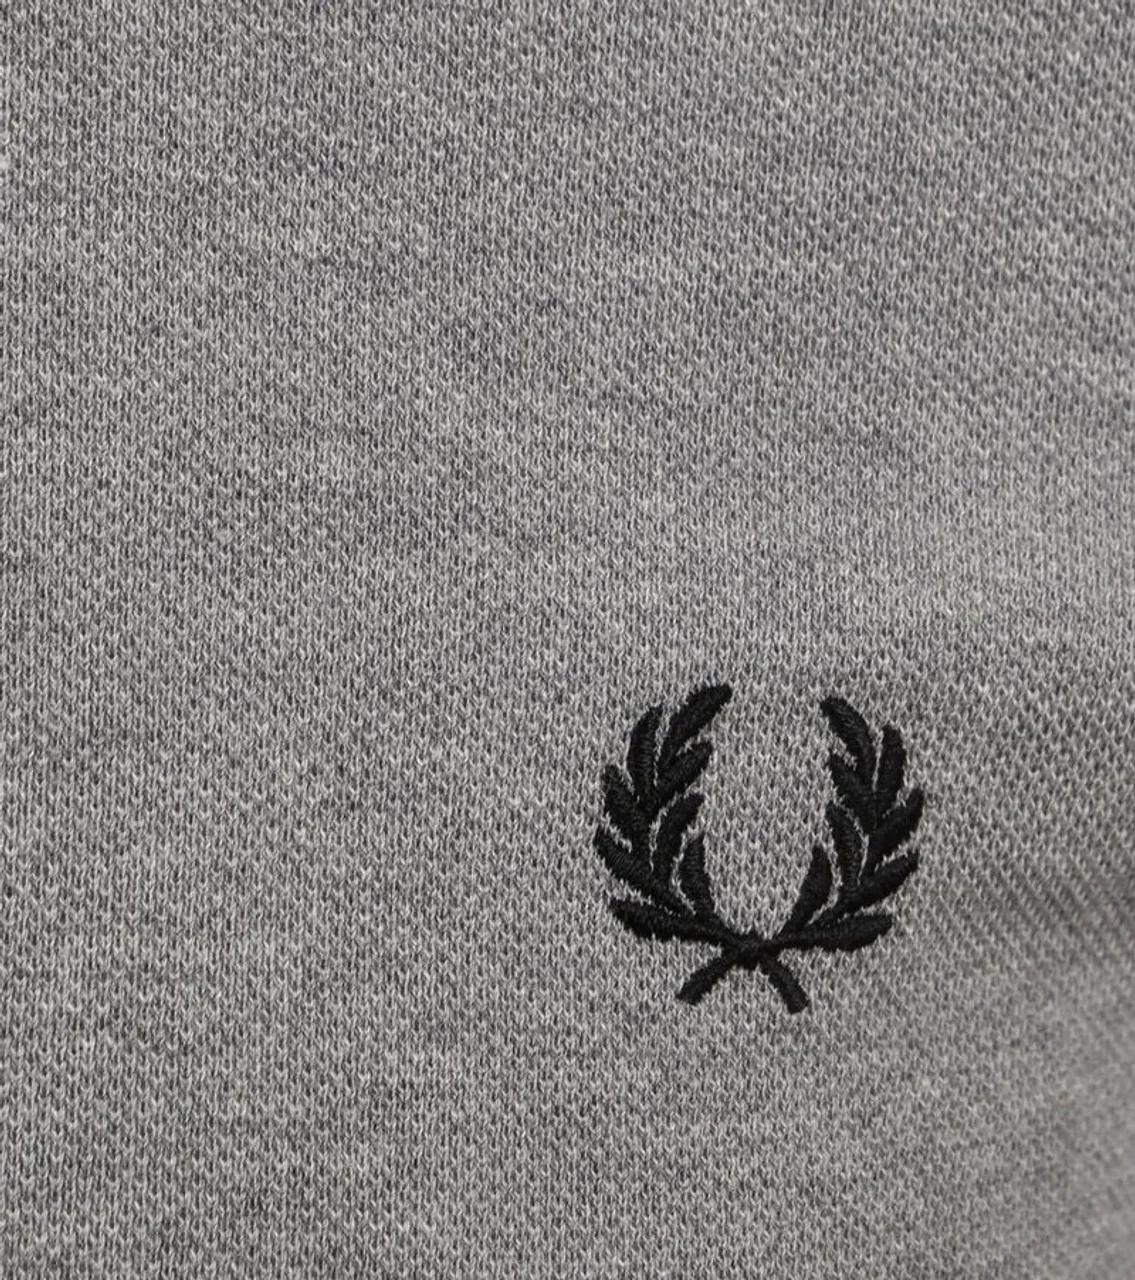 Fred Perry Polo M3600 Mid Grijs